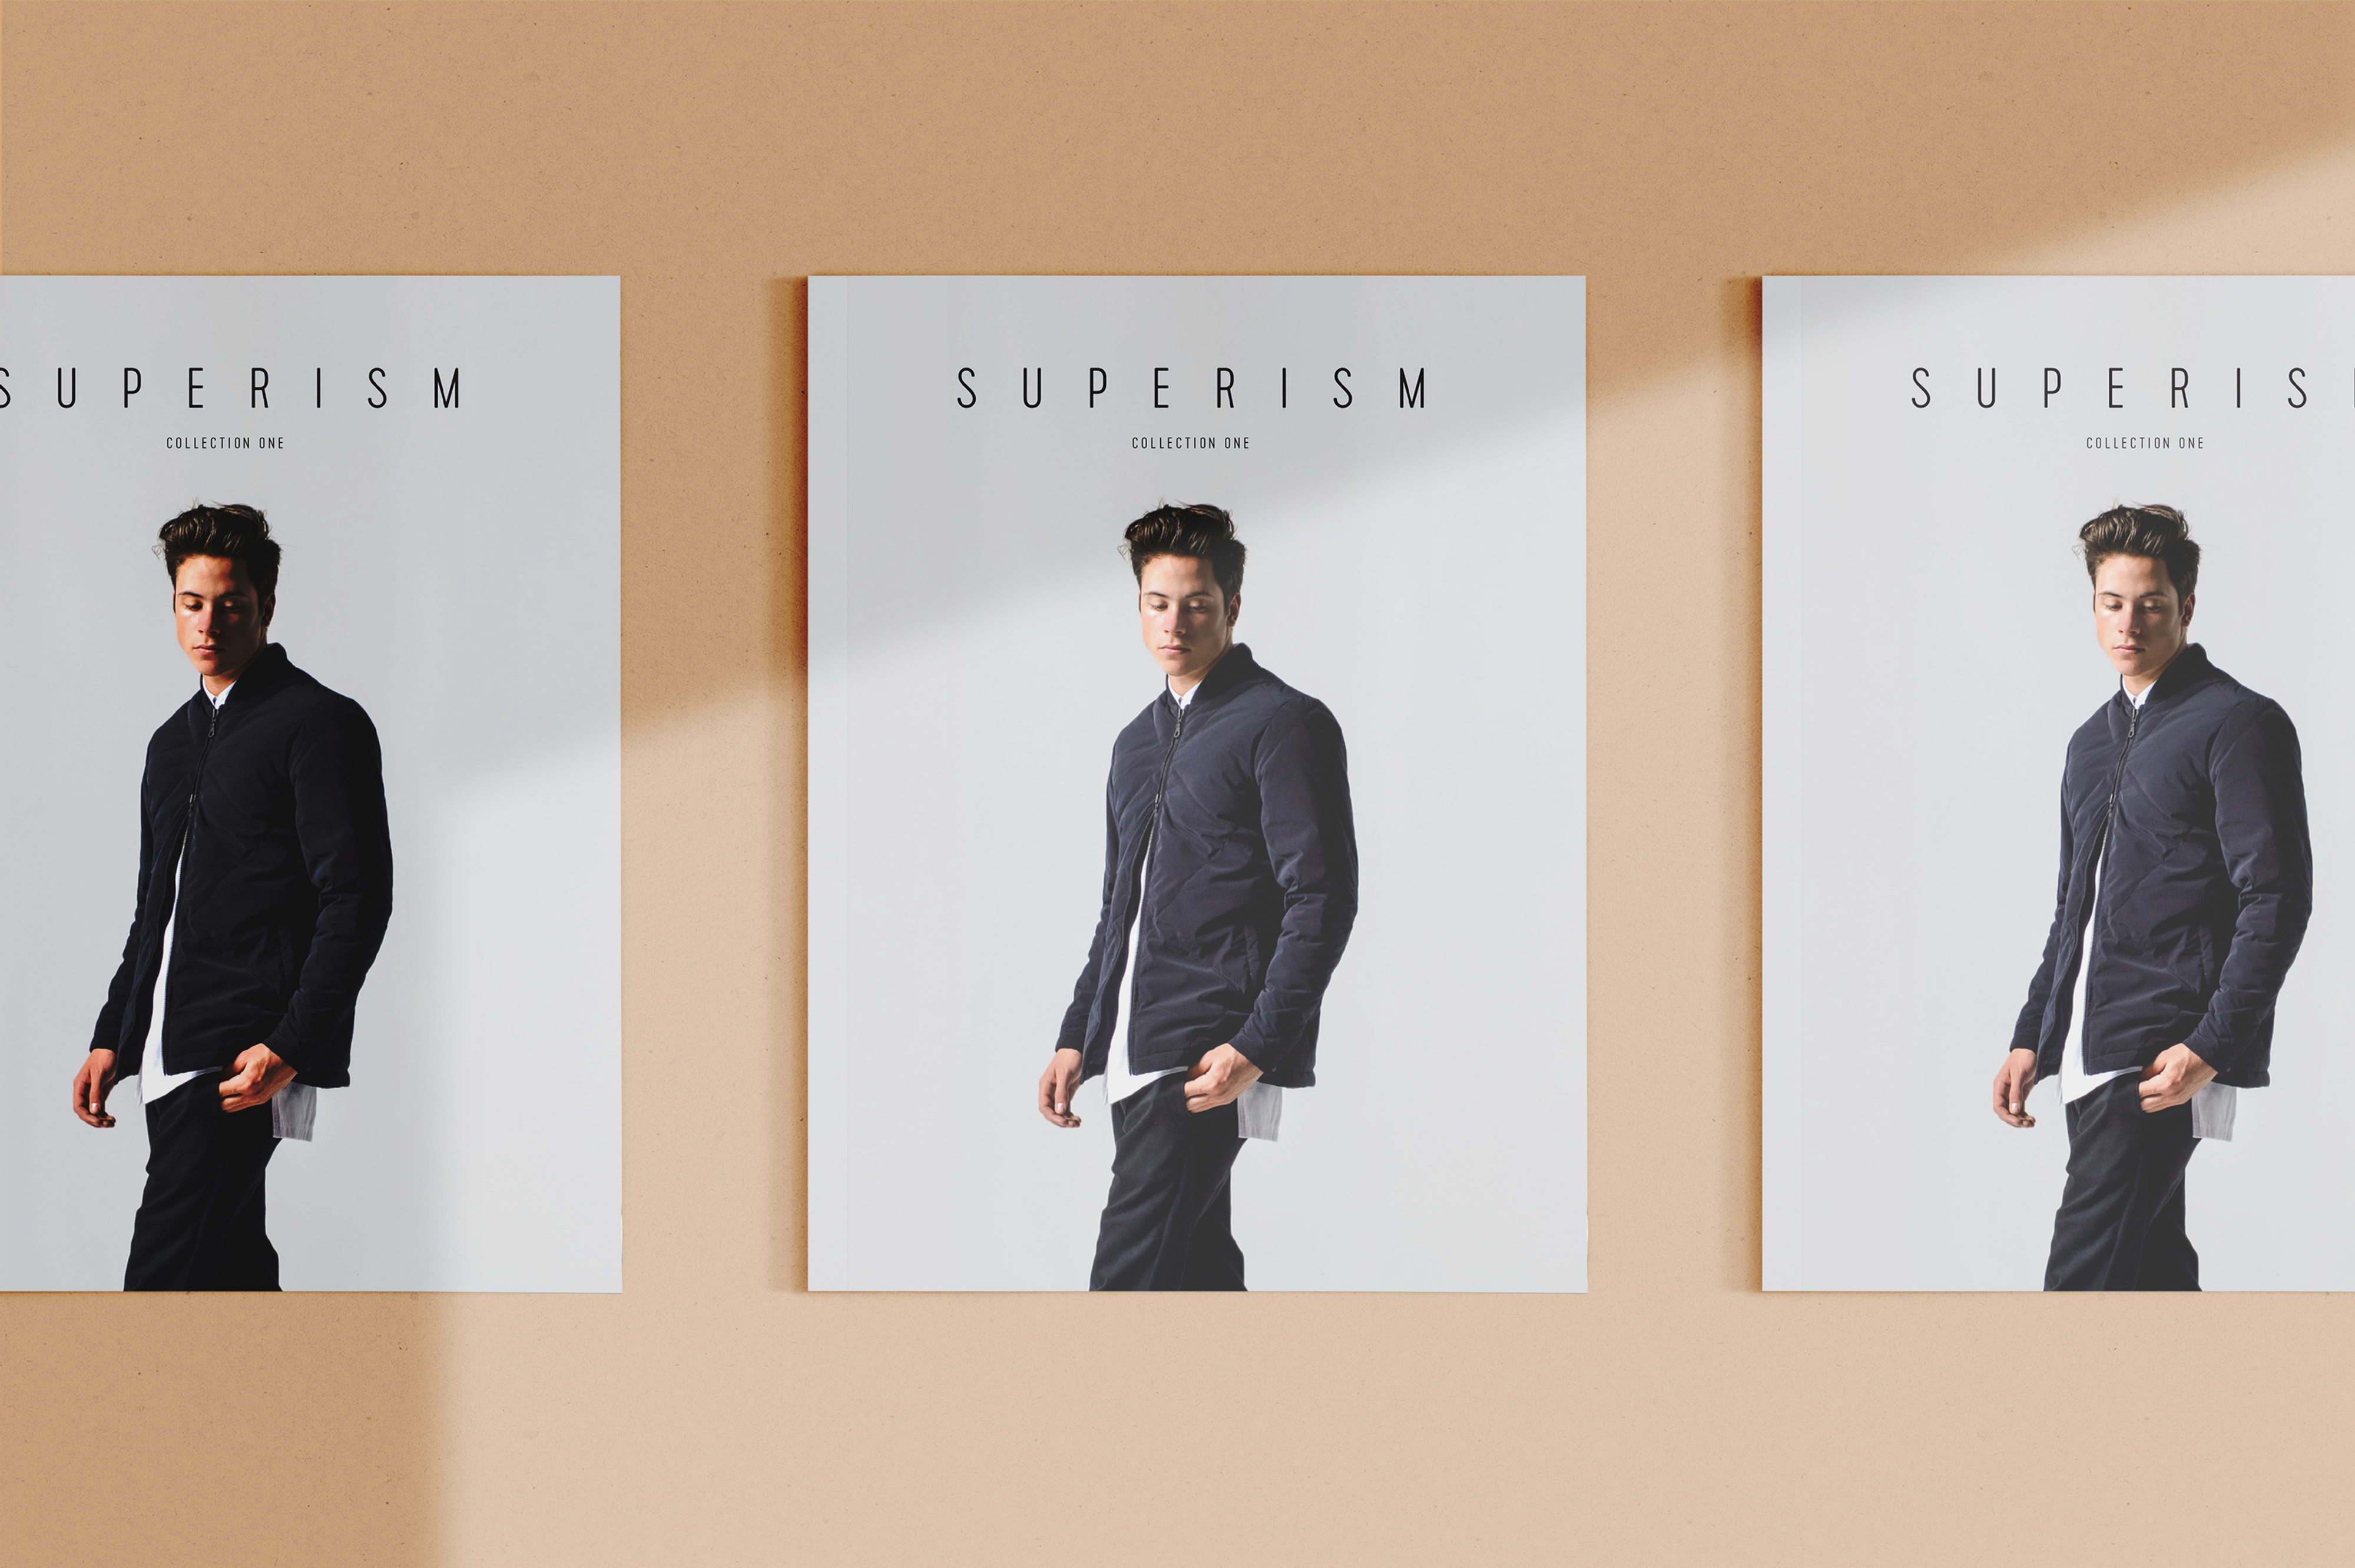 The super slim style - wiseguyofficial